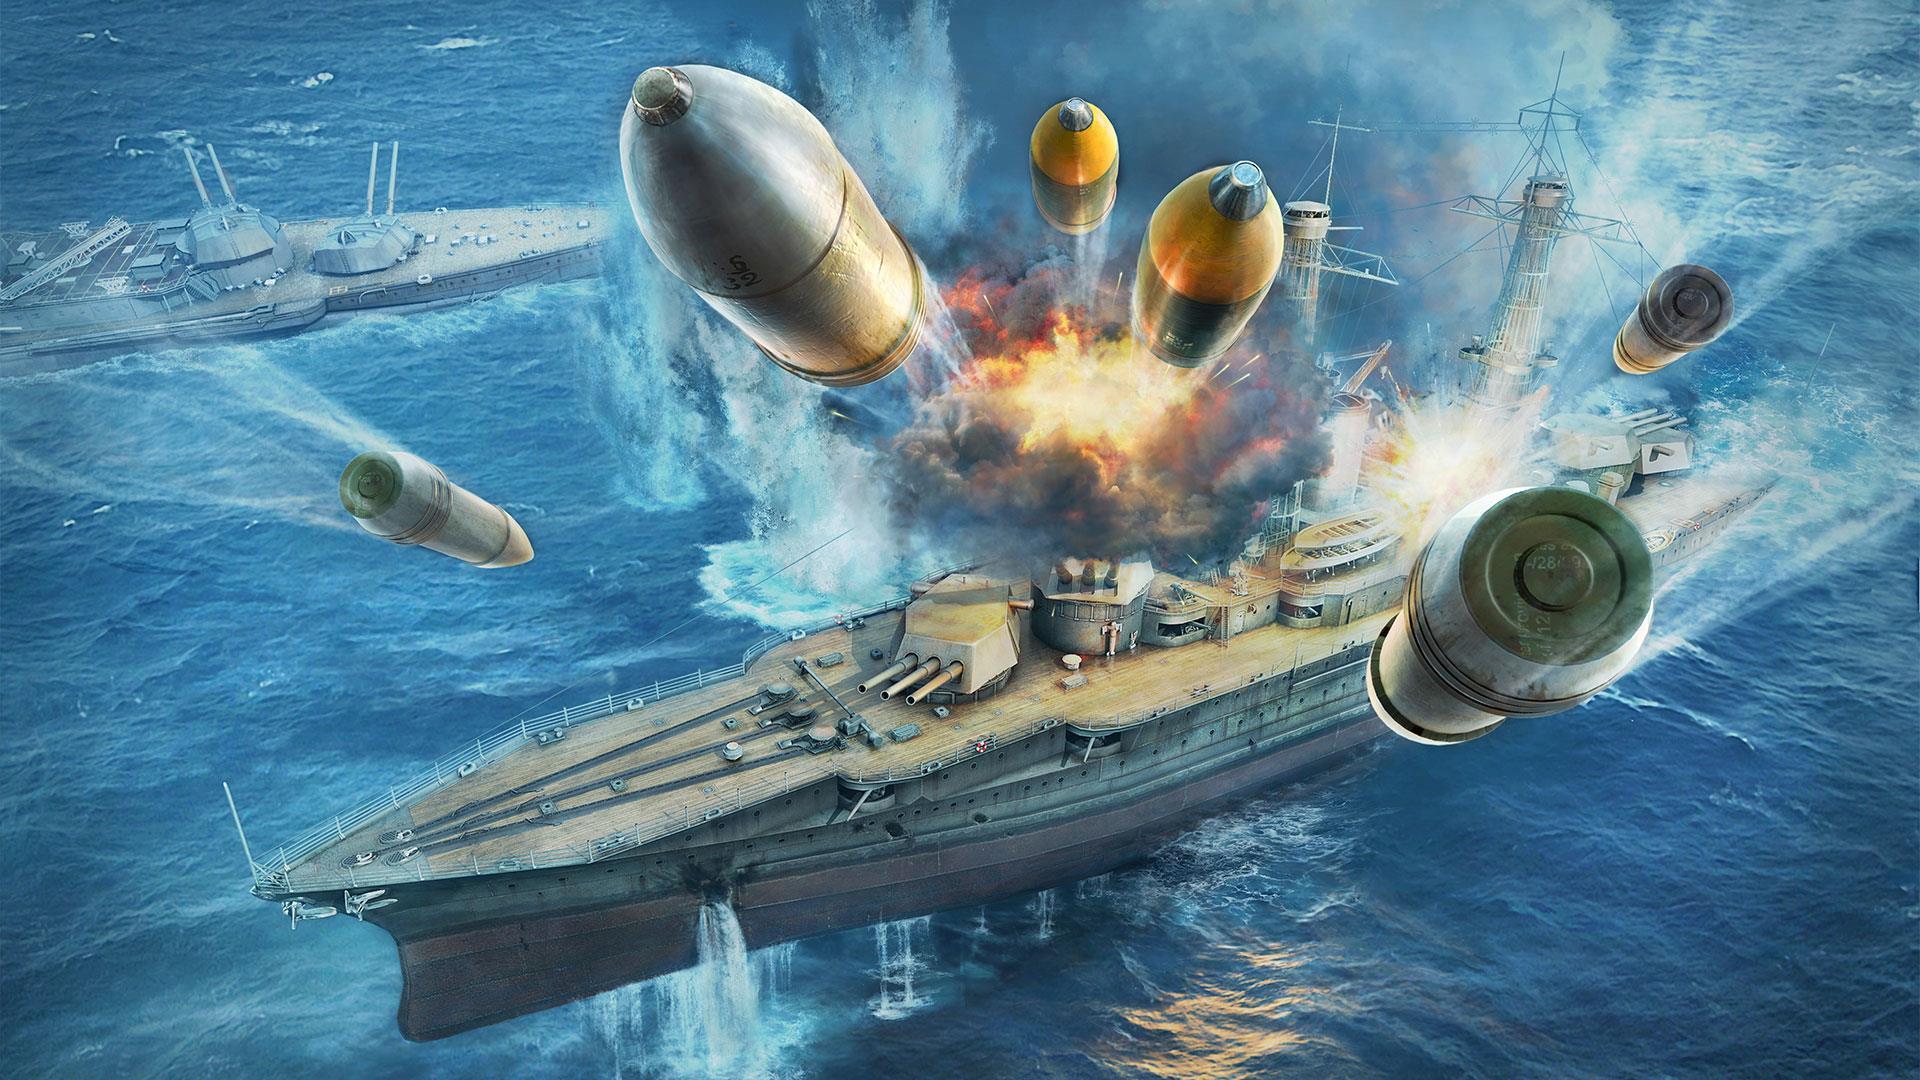 View 1080P World Of Warships Wallpaper Images